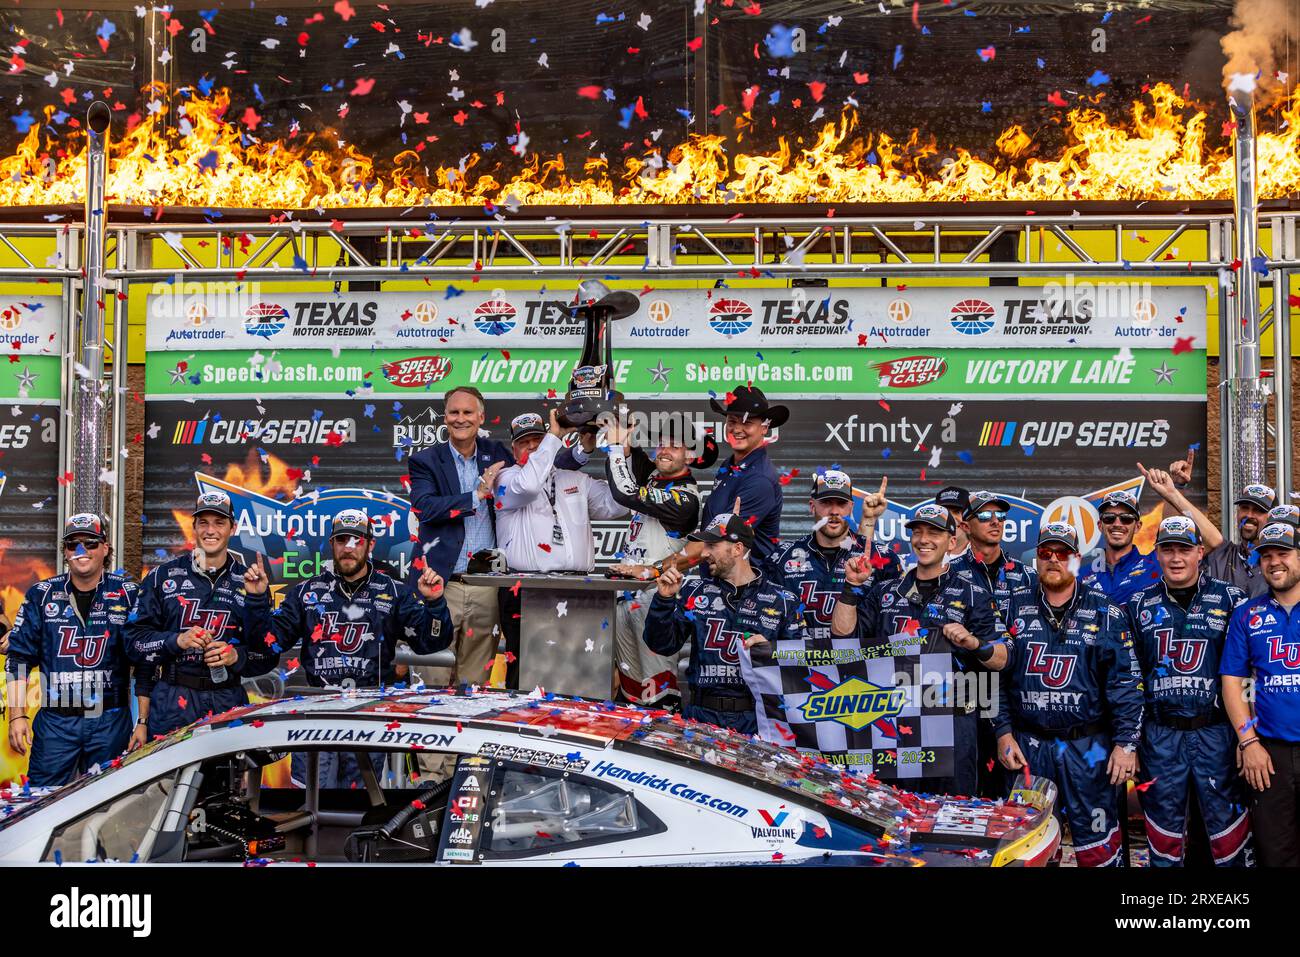 Fort Worth, Texas - September 24rd, 2023: William Byron, driver of the #24 Liberty University Chevrolet, after winning the NASCAR Autotrader EchoPark Automotive 400 at Texas Motor Speedway. Credit: Nick Paruch/Alamy Live News Stock Photo